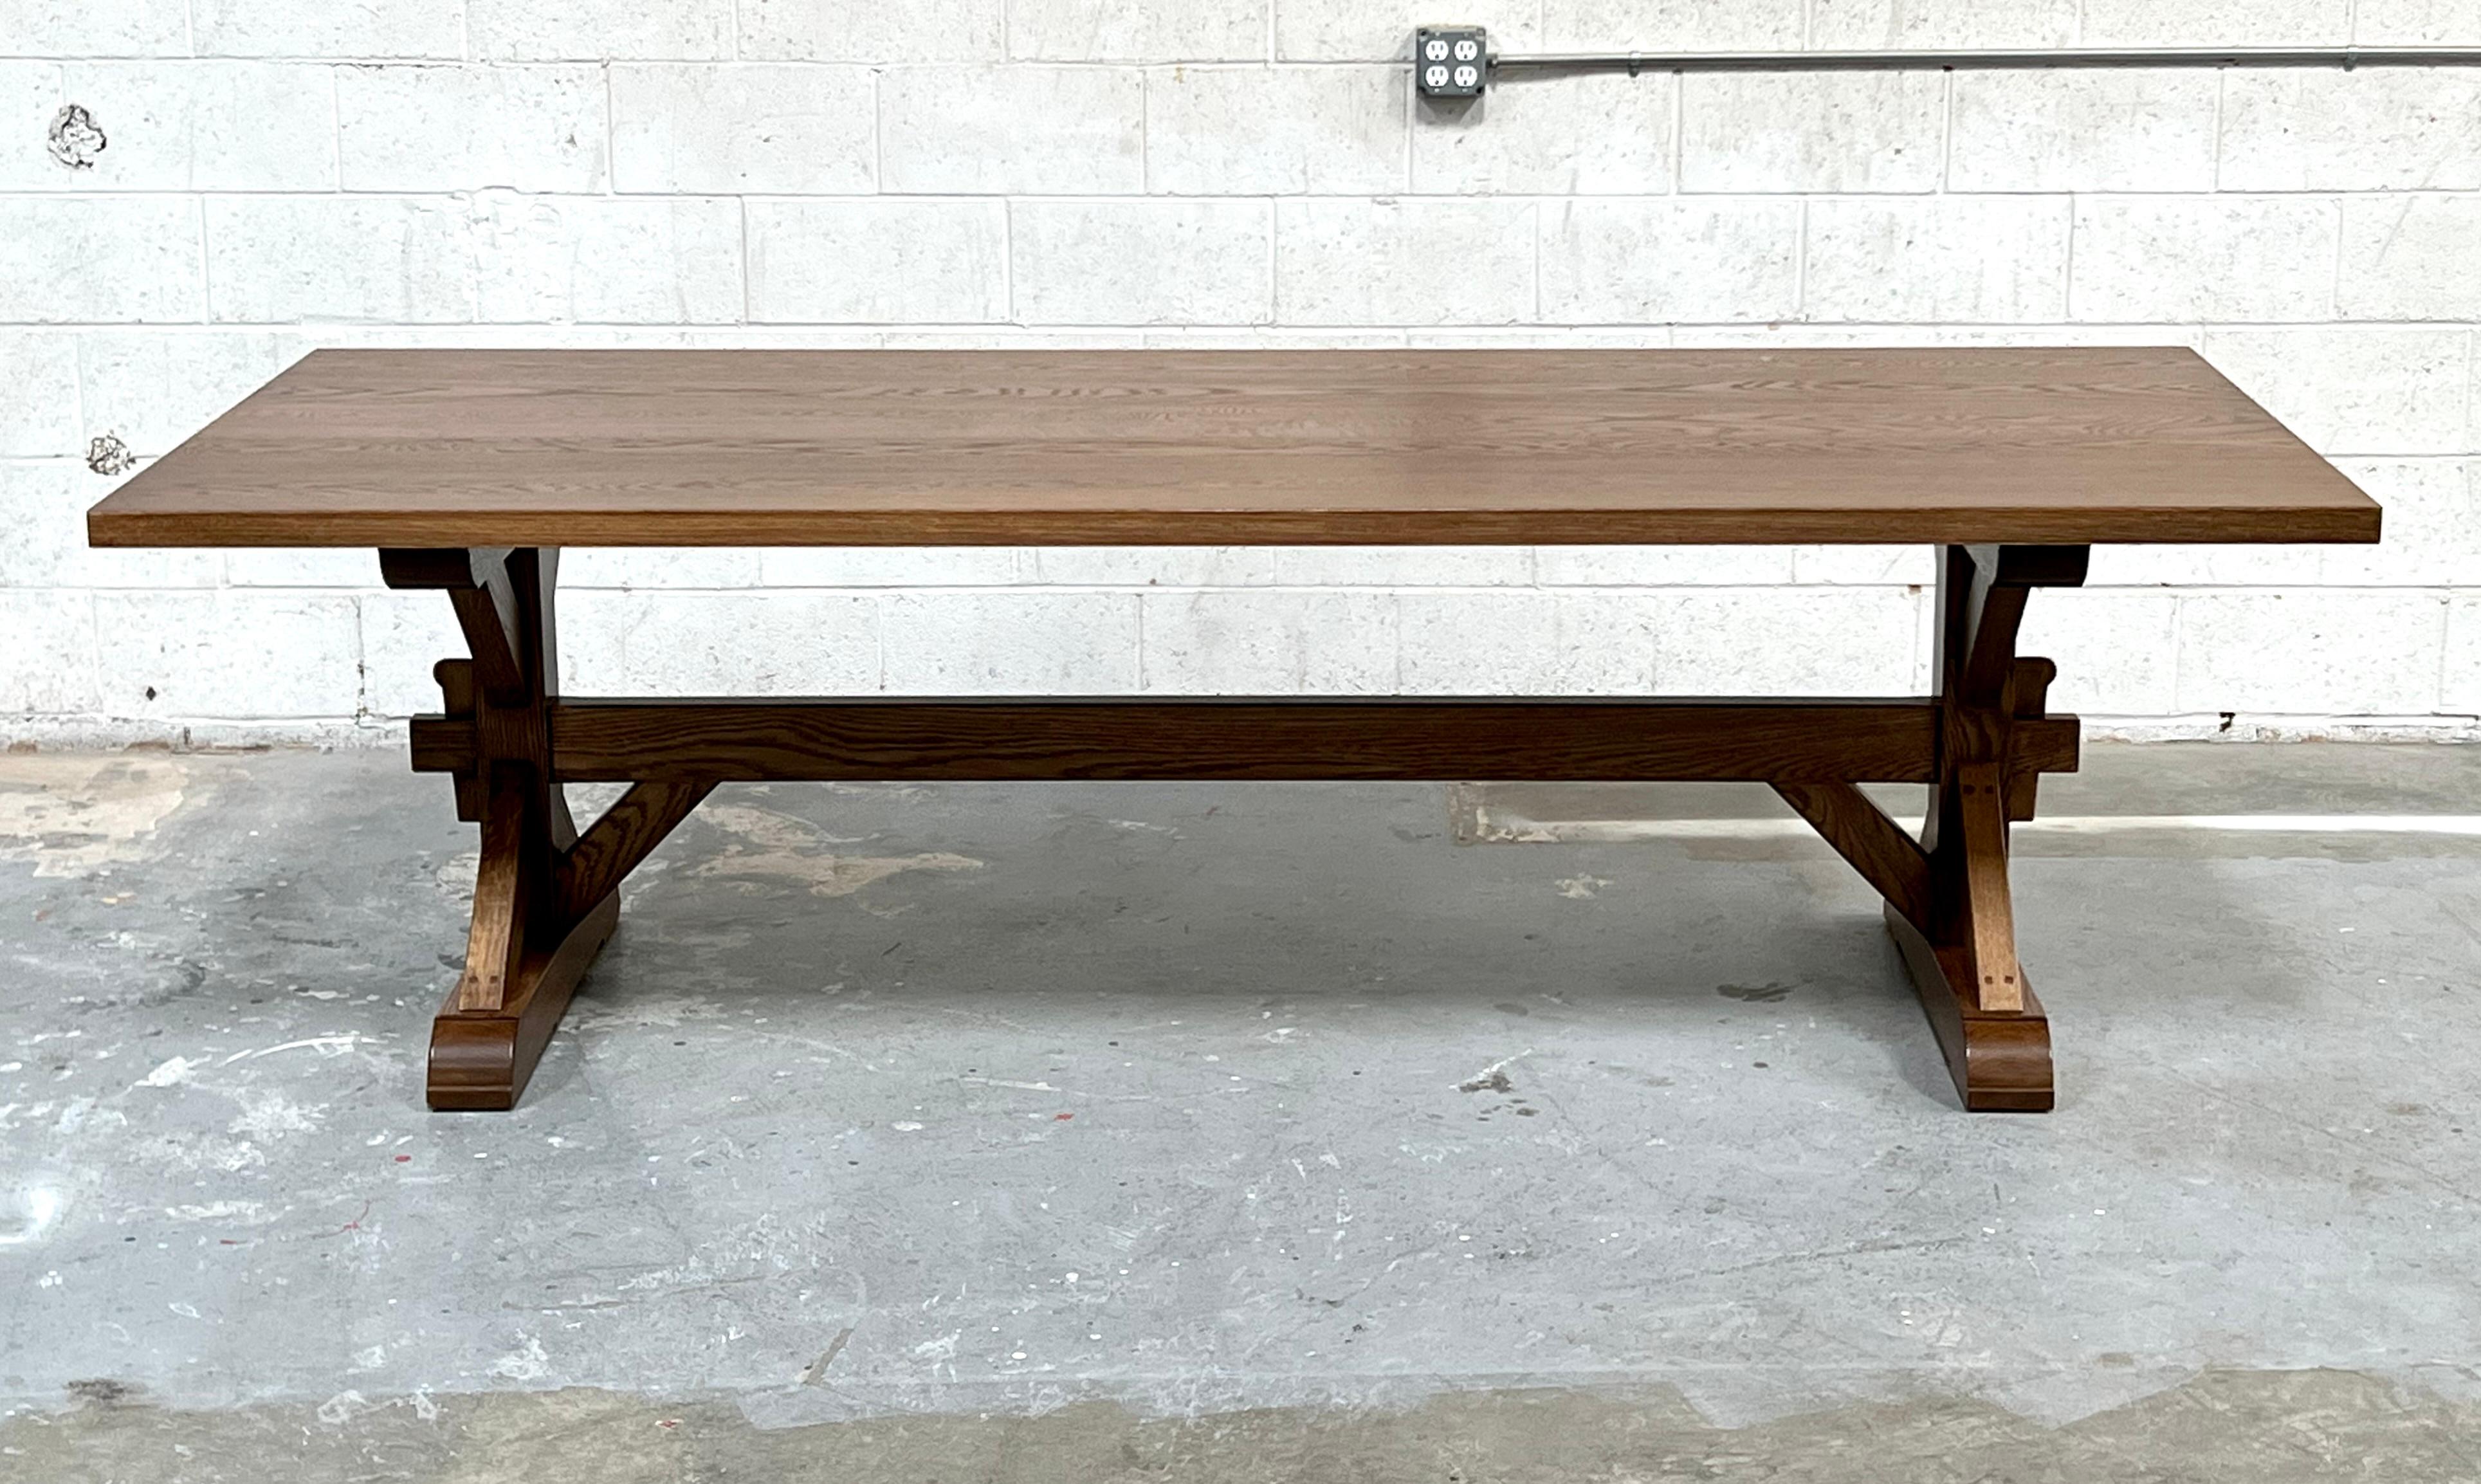 This farm table made from flat sawn white oak and it is seen here in 120